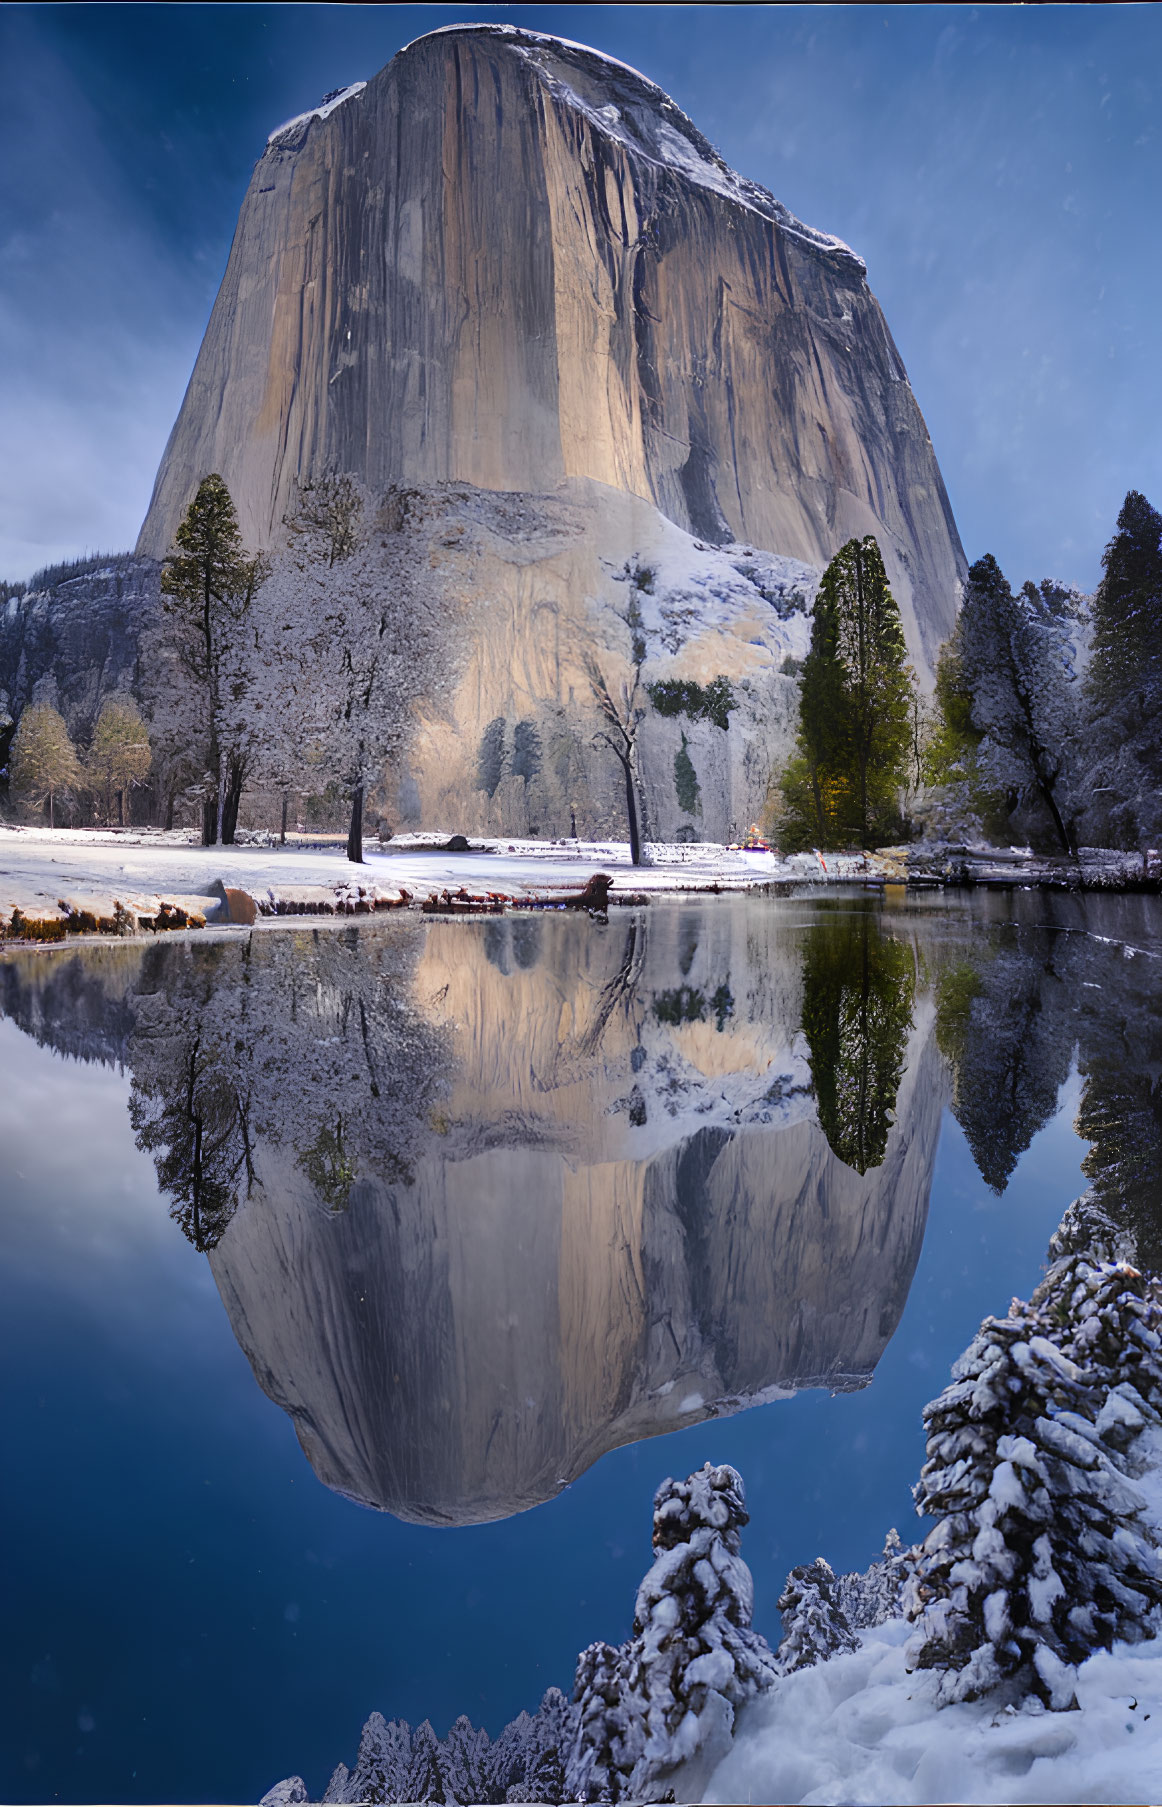 Snowy El Capitan Reflected in River with Trees and Blue Skies